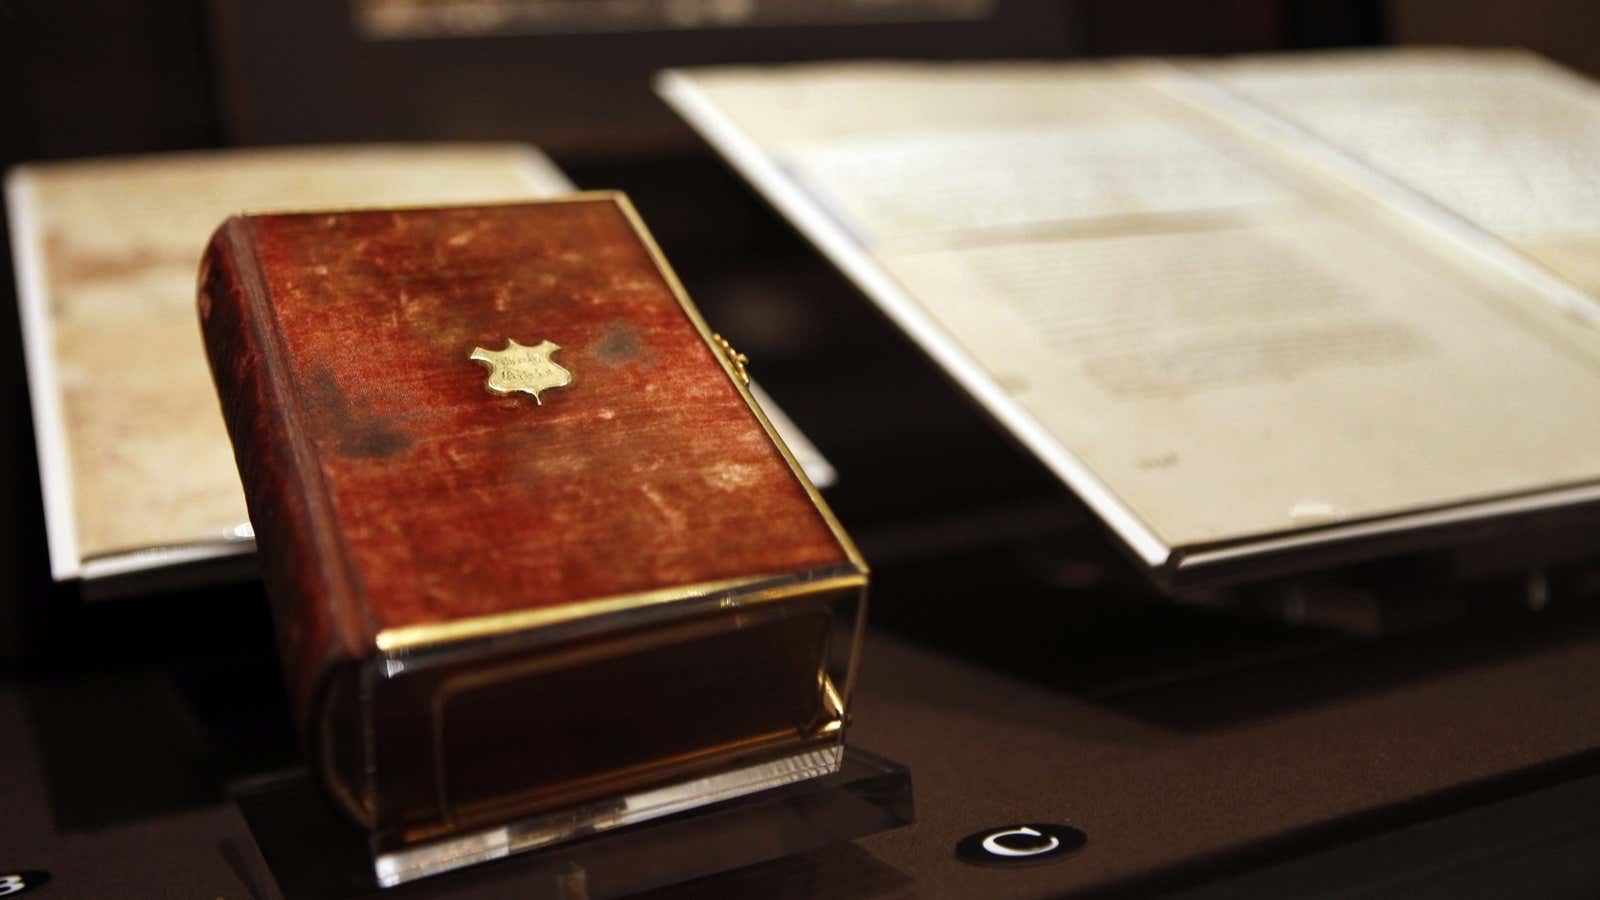 Lincoln’s 1861 Inaugural Bible and his first Inaugural address.